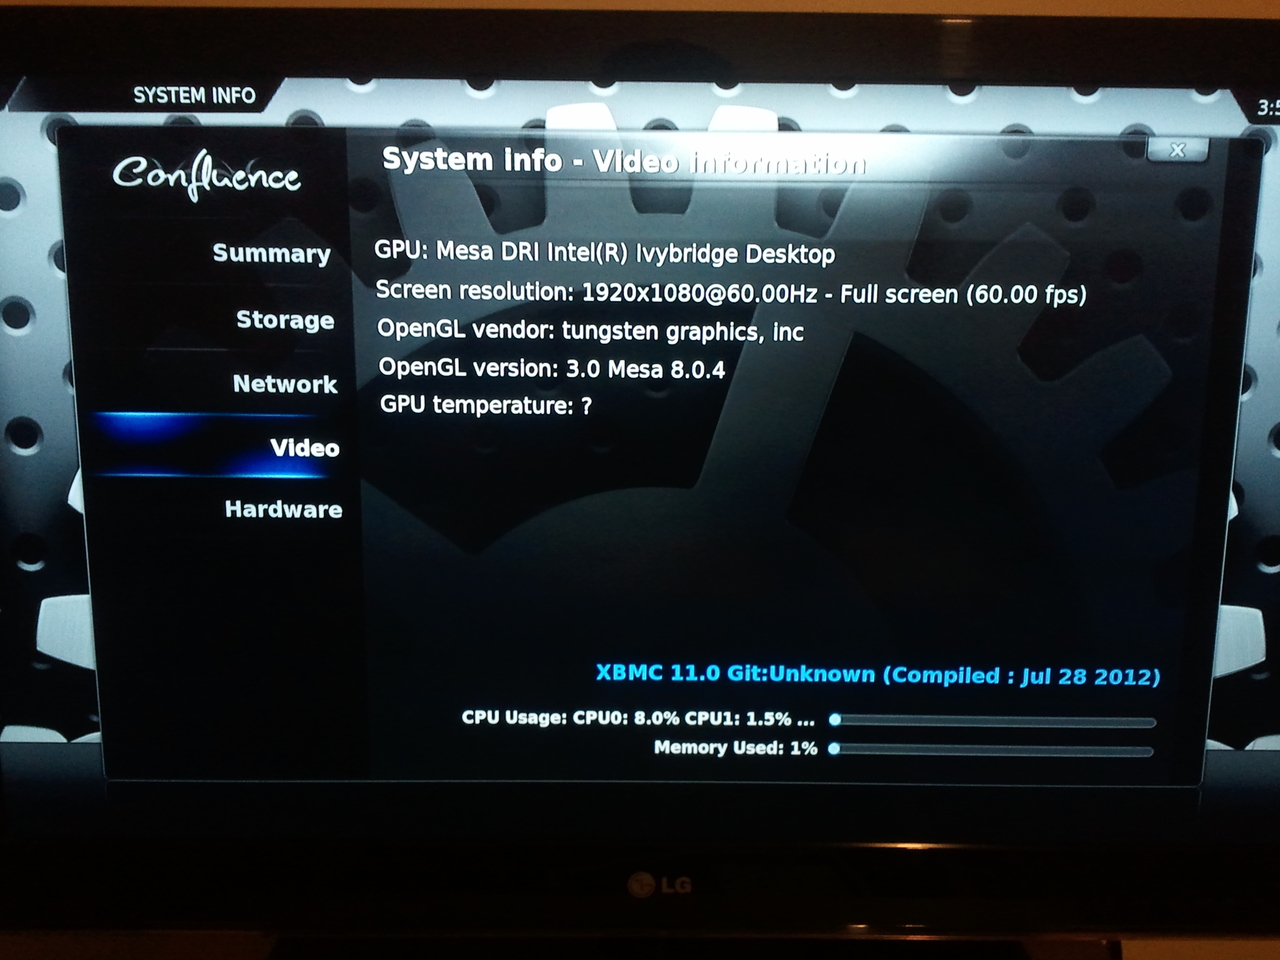 XBMC showing system information